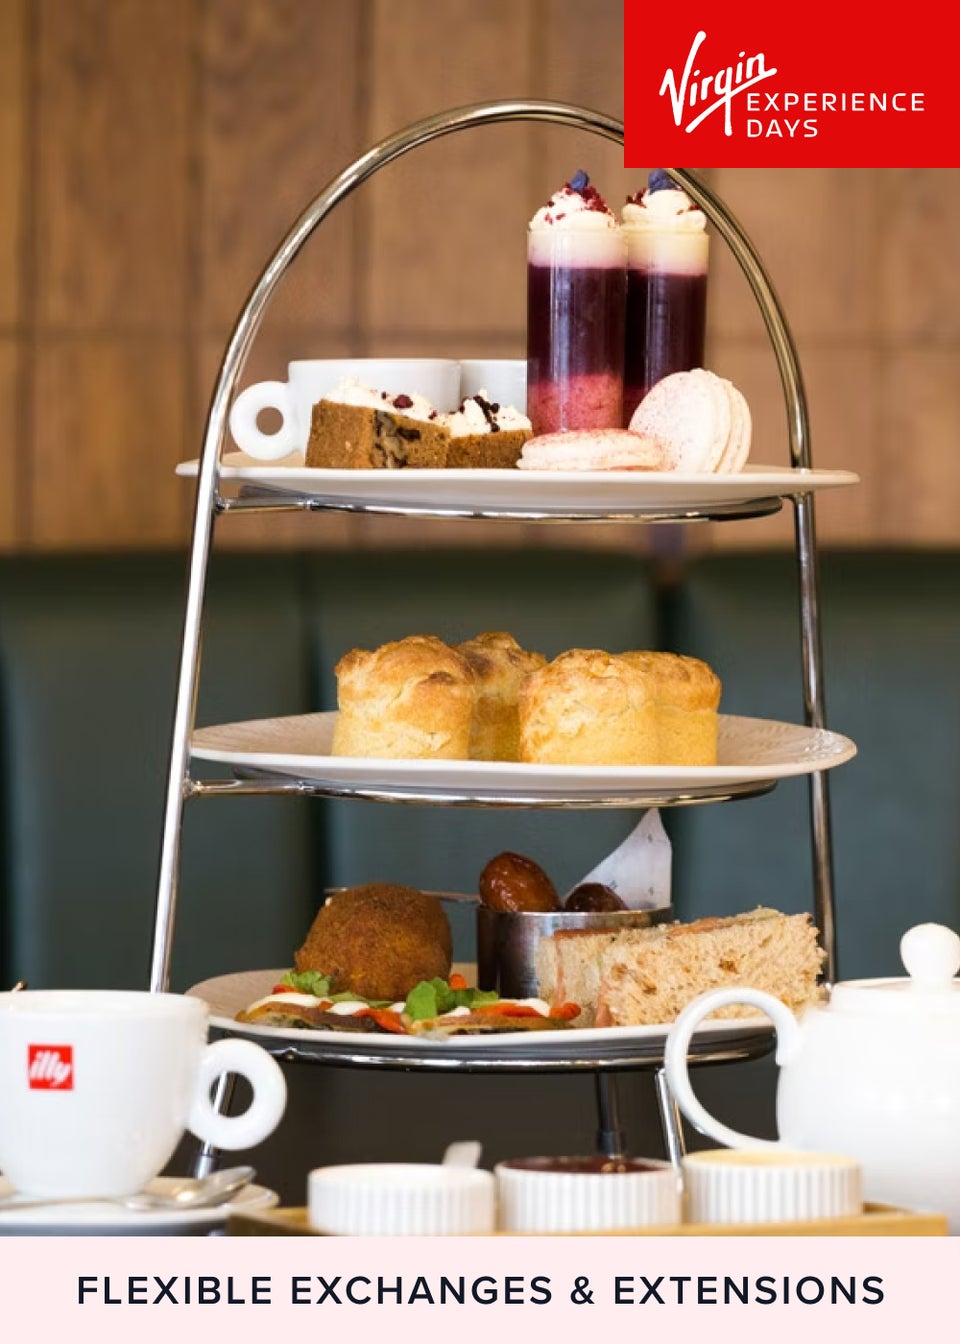 Virgin Experience Days Traditional Afternoon Tea for Two